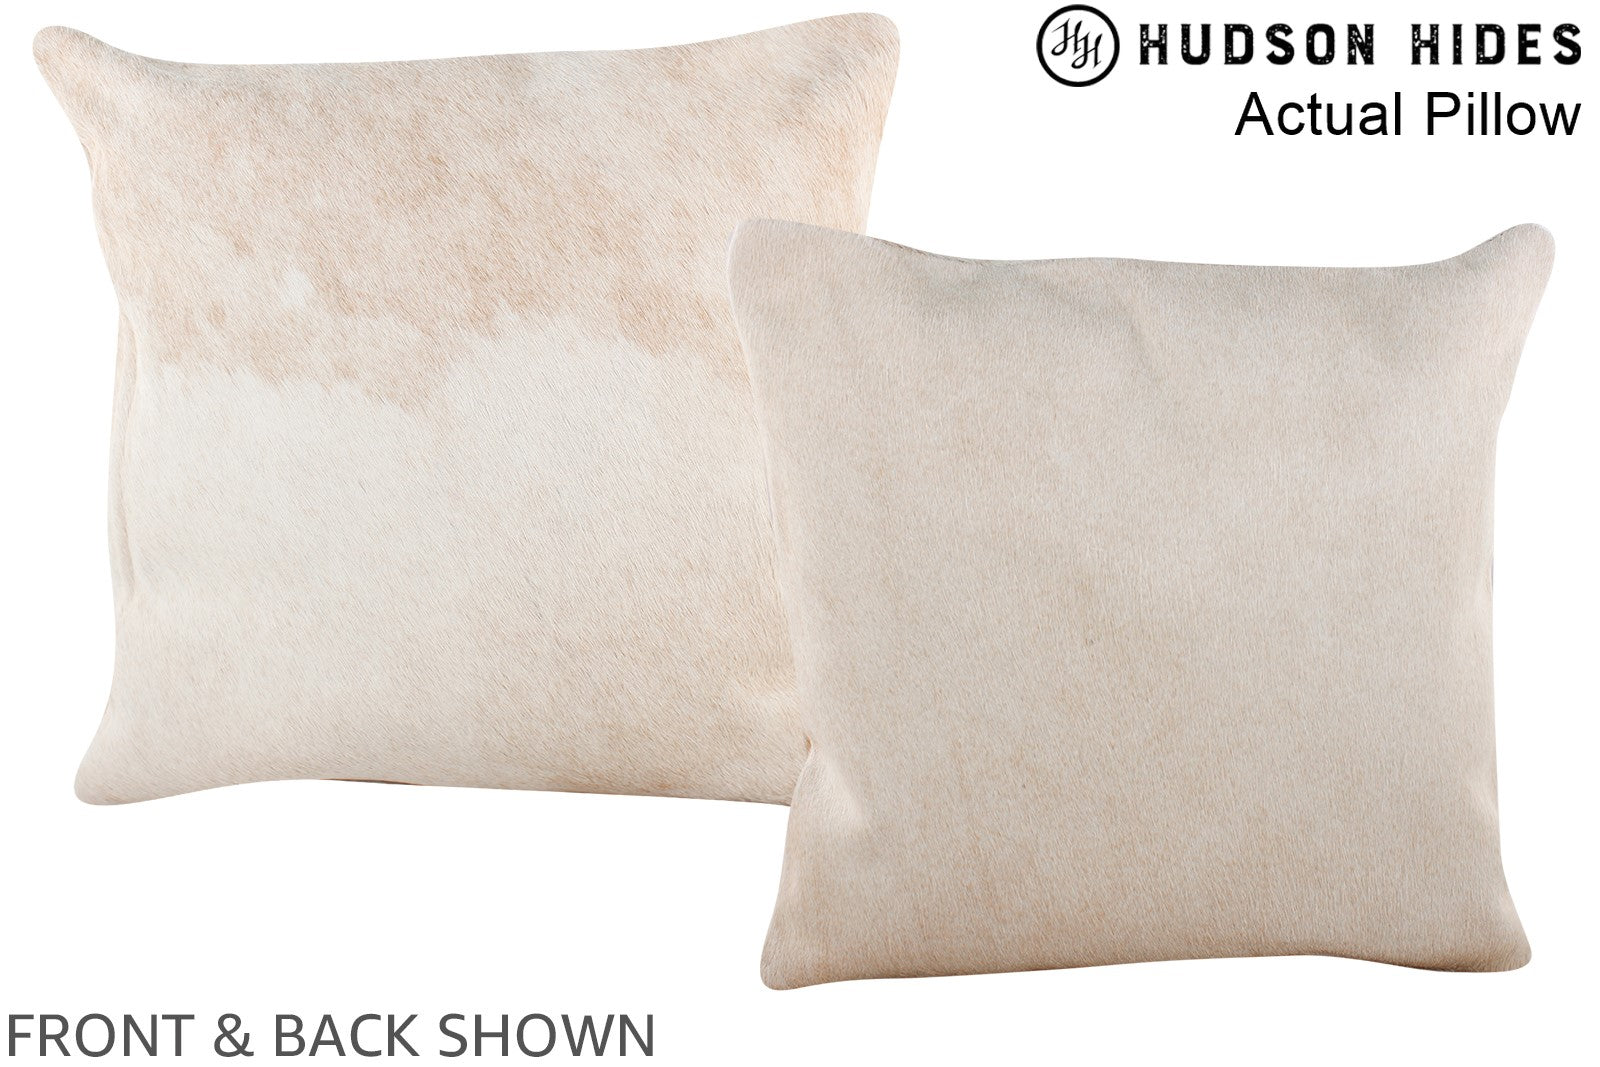 Beige and White Cowhide Pillow #A13675